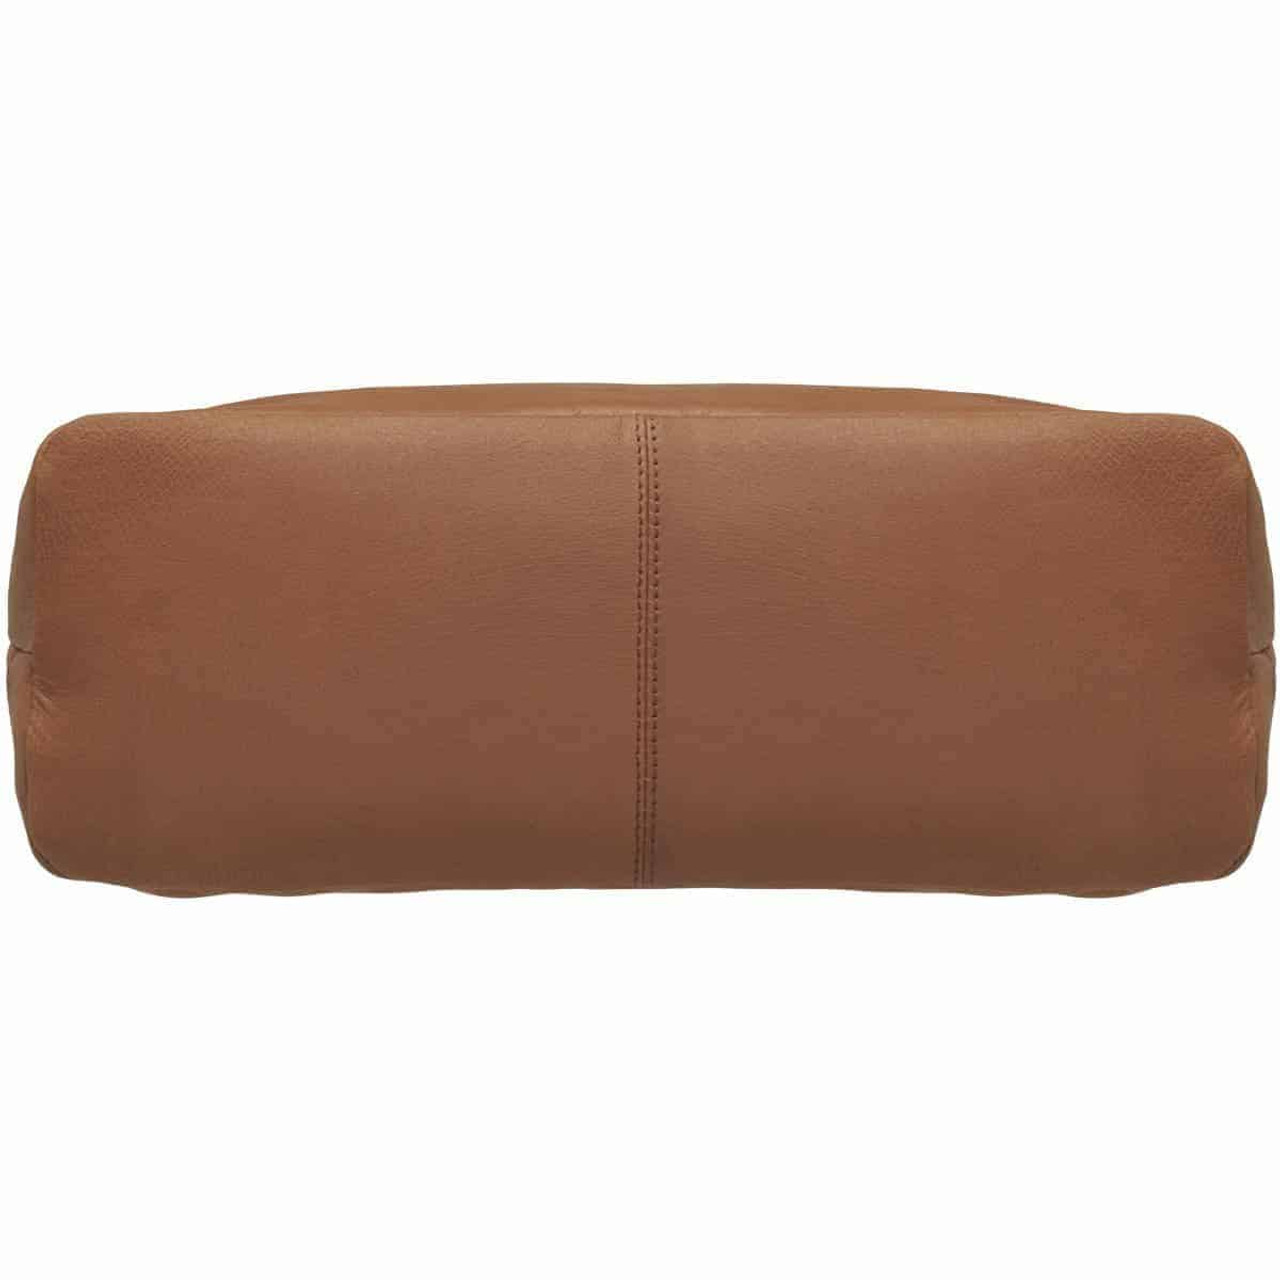 GTM Concealed Carry Large Hobo Sac Tan